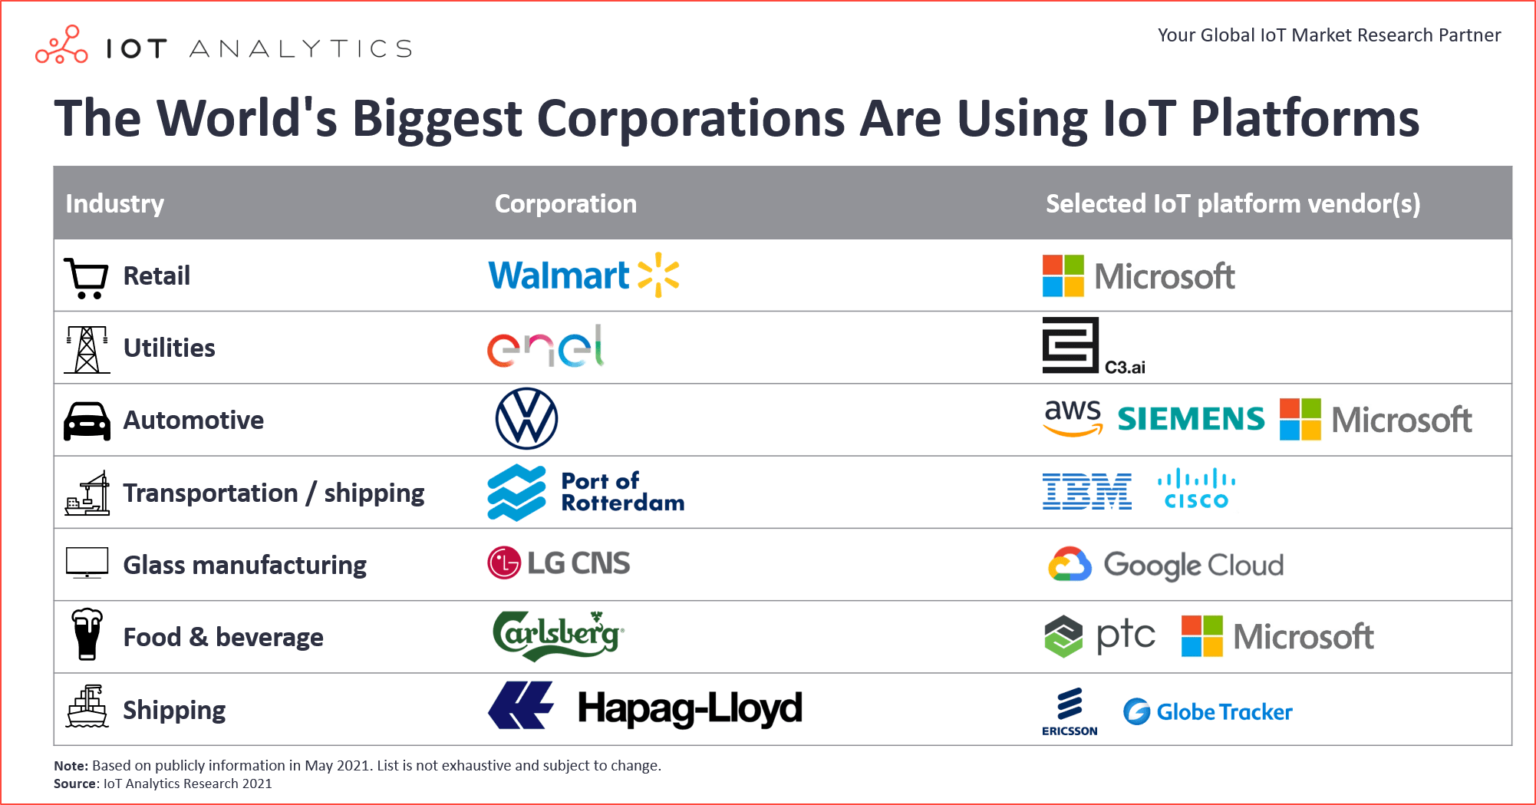 Worlds-Biggest-Corporations-Are-Using-IoT-Platforms-1536x805.png (281 KB)